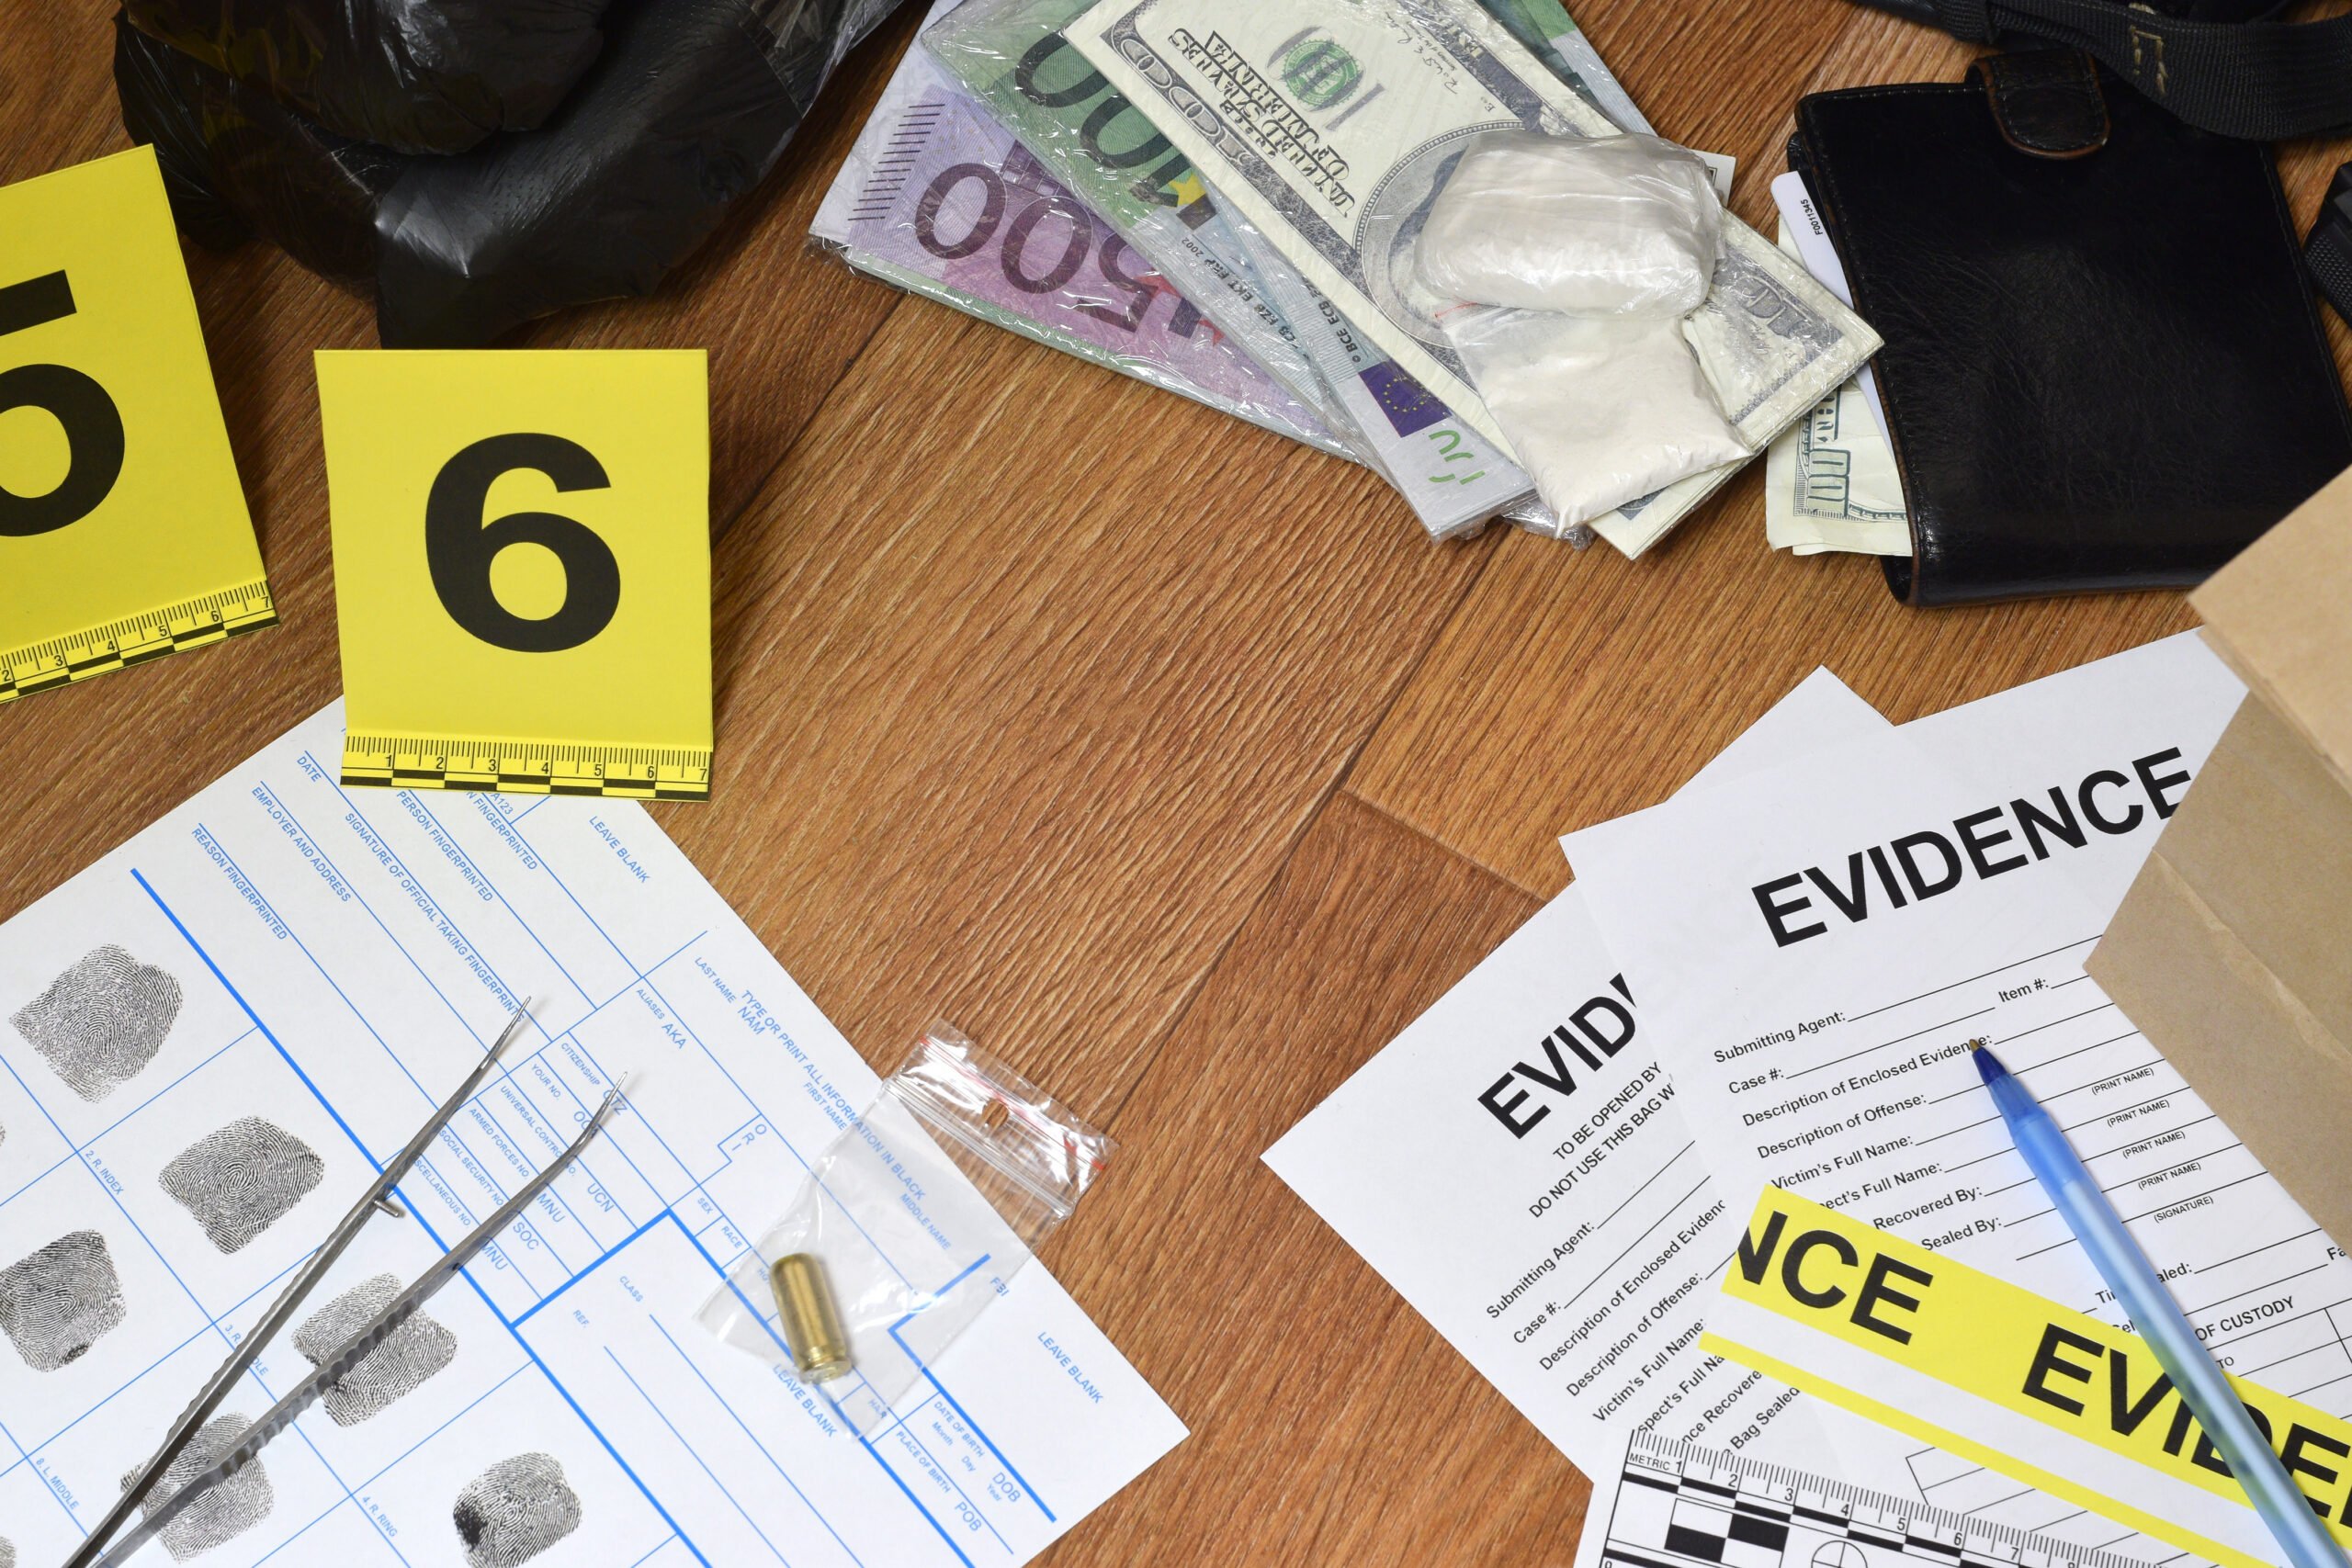 Evidence Chain of Custody Labels and brown paper bag with fingerprints applicant card lies against big heroin packets and packs of money bills as evidence in crime scene investigation process close up